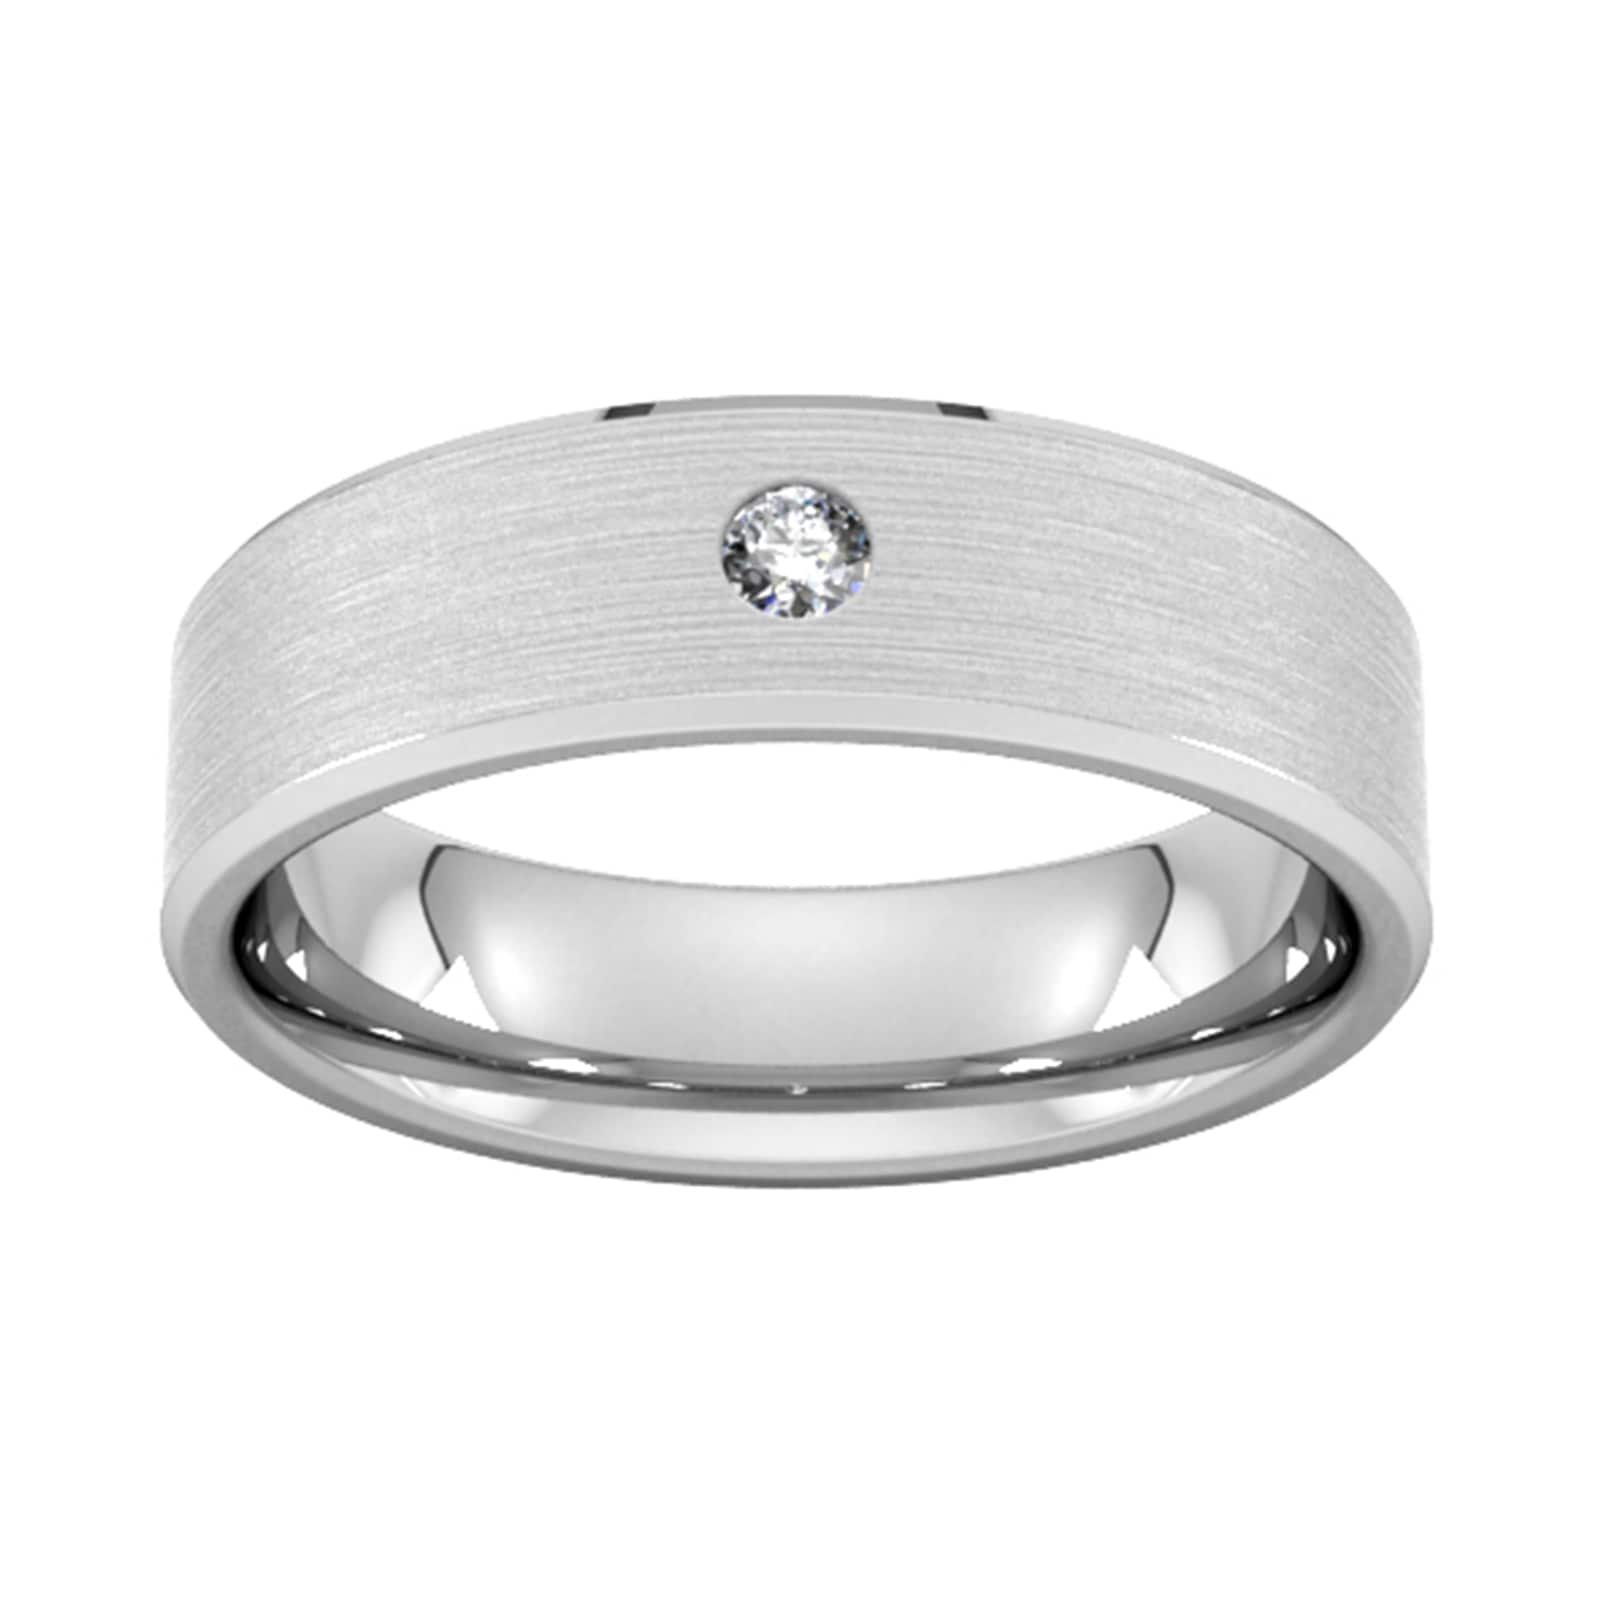 6mm Brilliant Cut Diamond Set Chamfered Edge Wedding Ring In 18 Carat White Gold - Ring Size Y